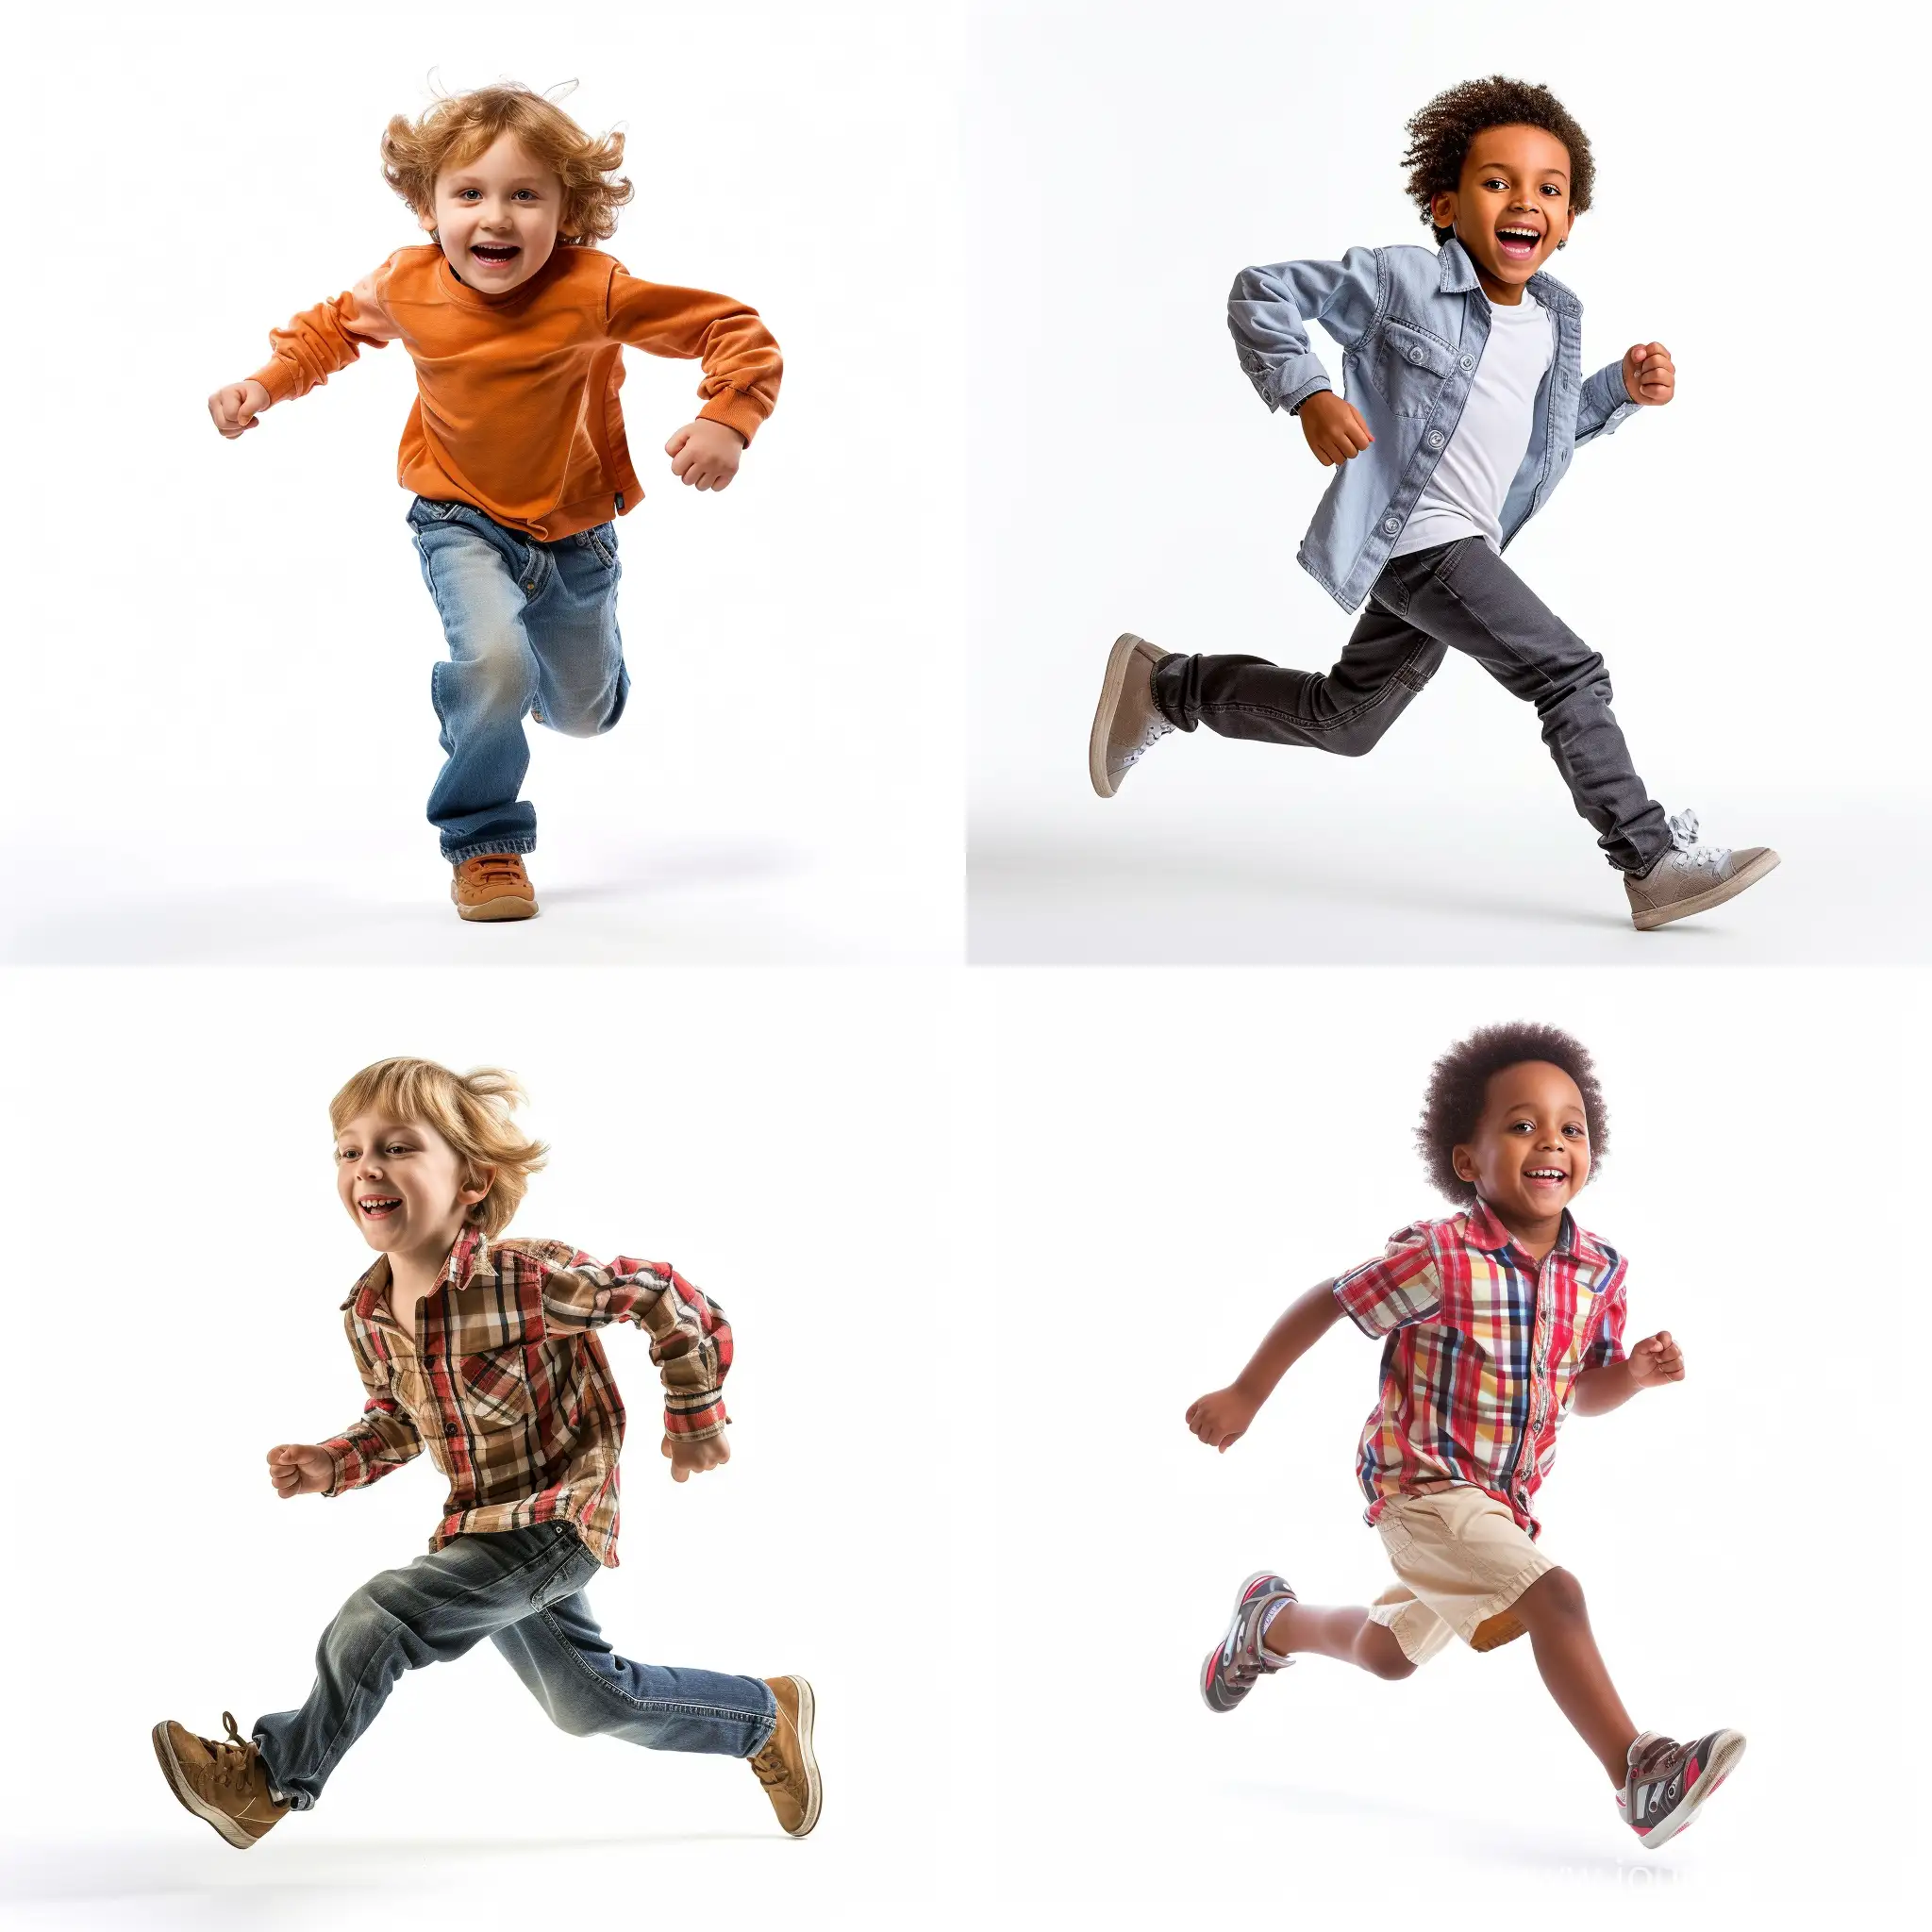 Energetic-Child-Running-Against-Clean-White-Background